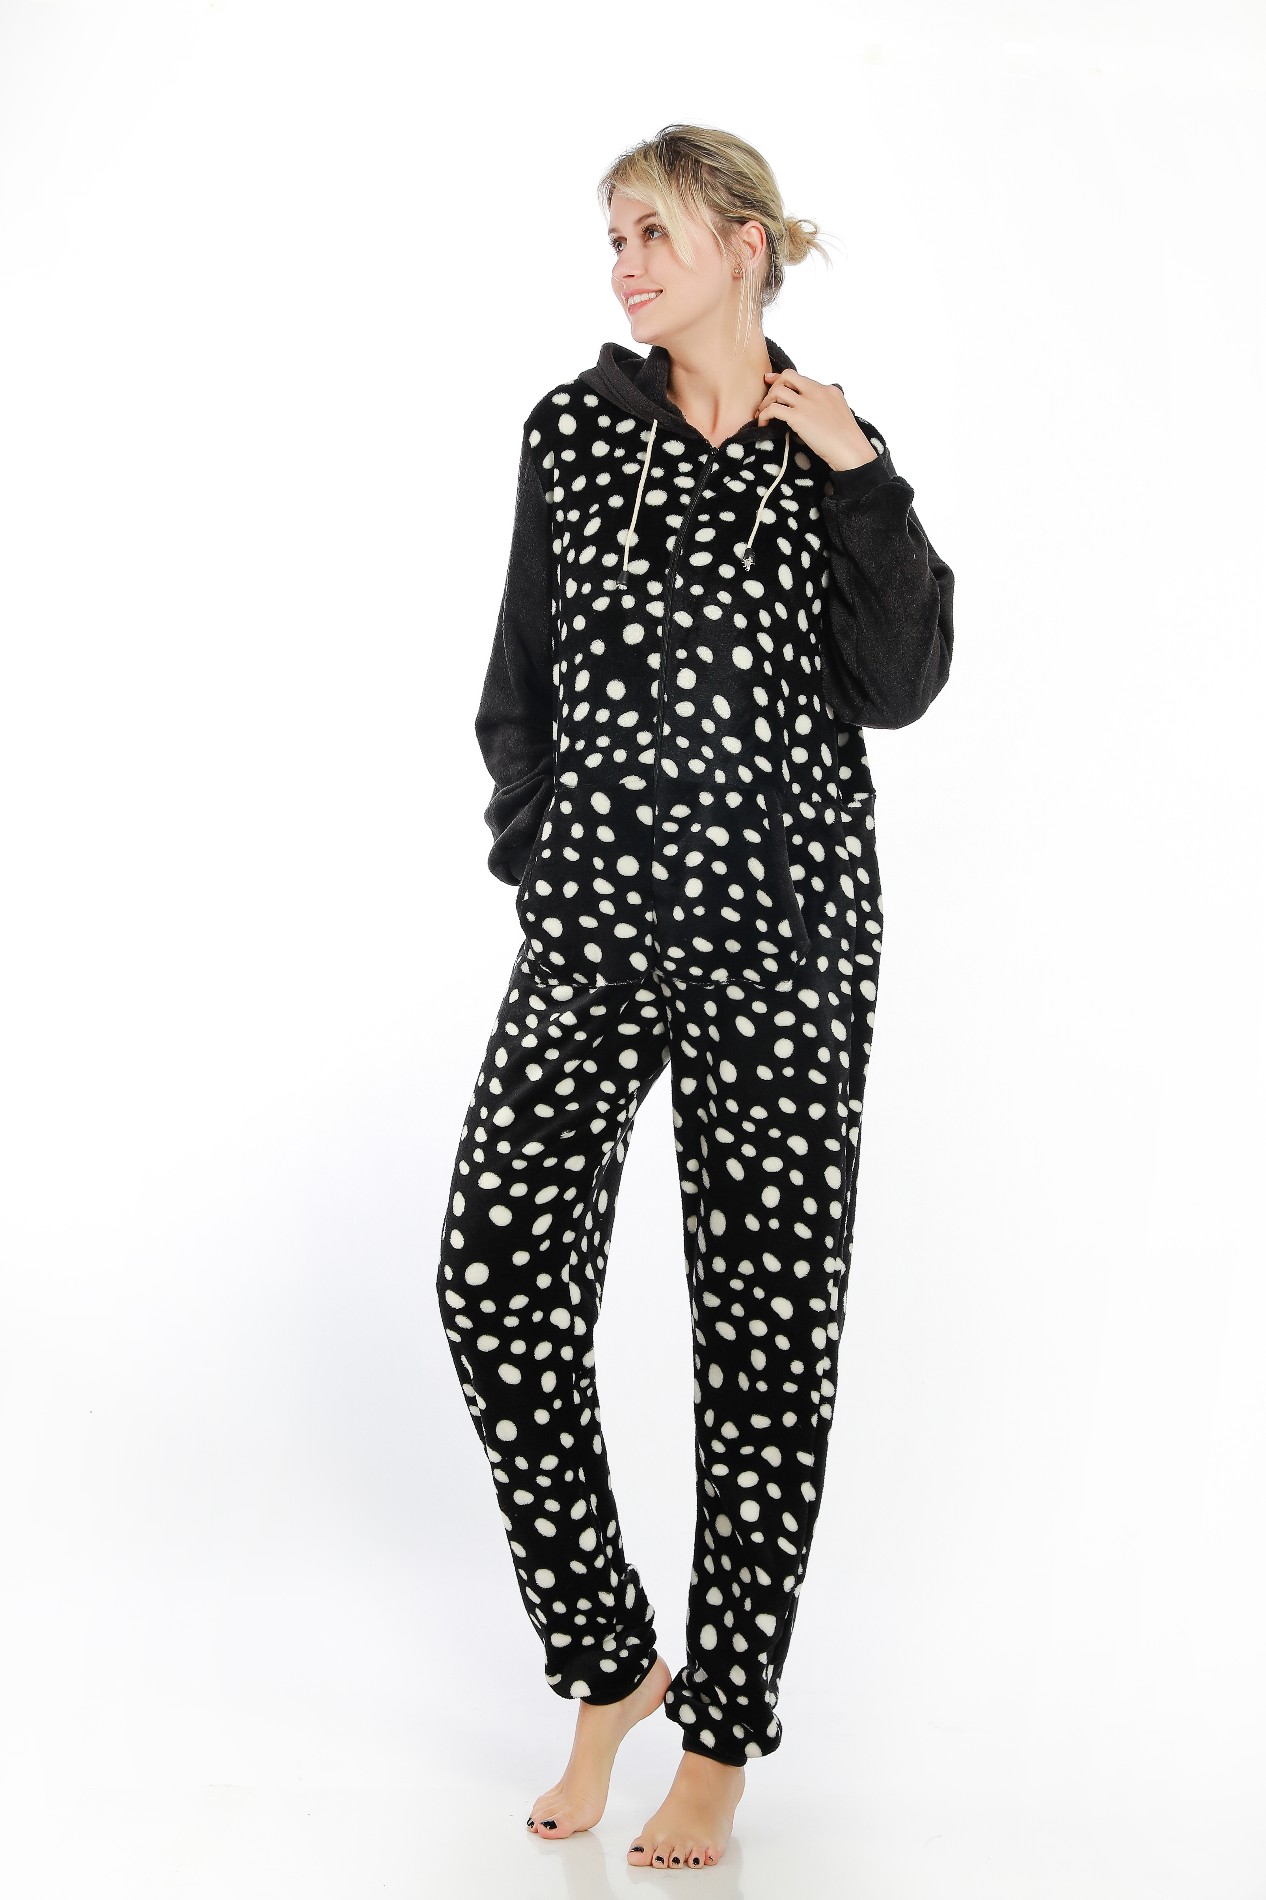 Kupte White Spotted Pajamas Womens Flannel Jumpsuit,White Spotted Pajamas Womens Flannel Jumpsuit ceny. White Spotted Pajamas Womens Flannel Jumpsuit značky. White Spotted Pajamas Womens Flannel Jumpsuit Výrobce. White Spotted Pajamas Womens Flannel Jumpsuit citáty. White Spotted Pajamas Womens Flannel Jumpsuit společnost,